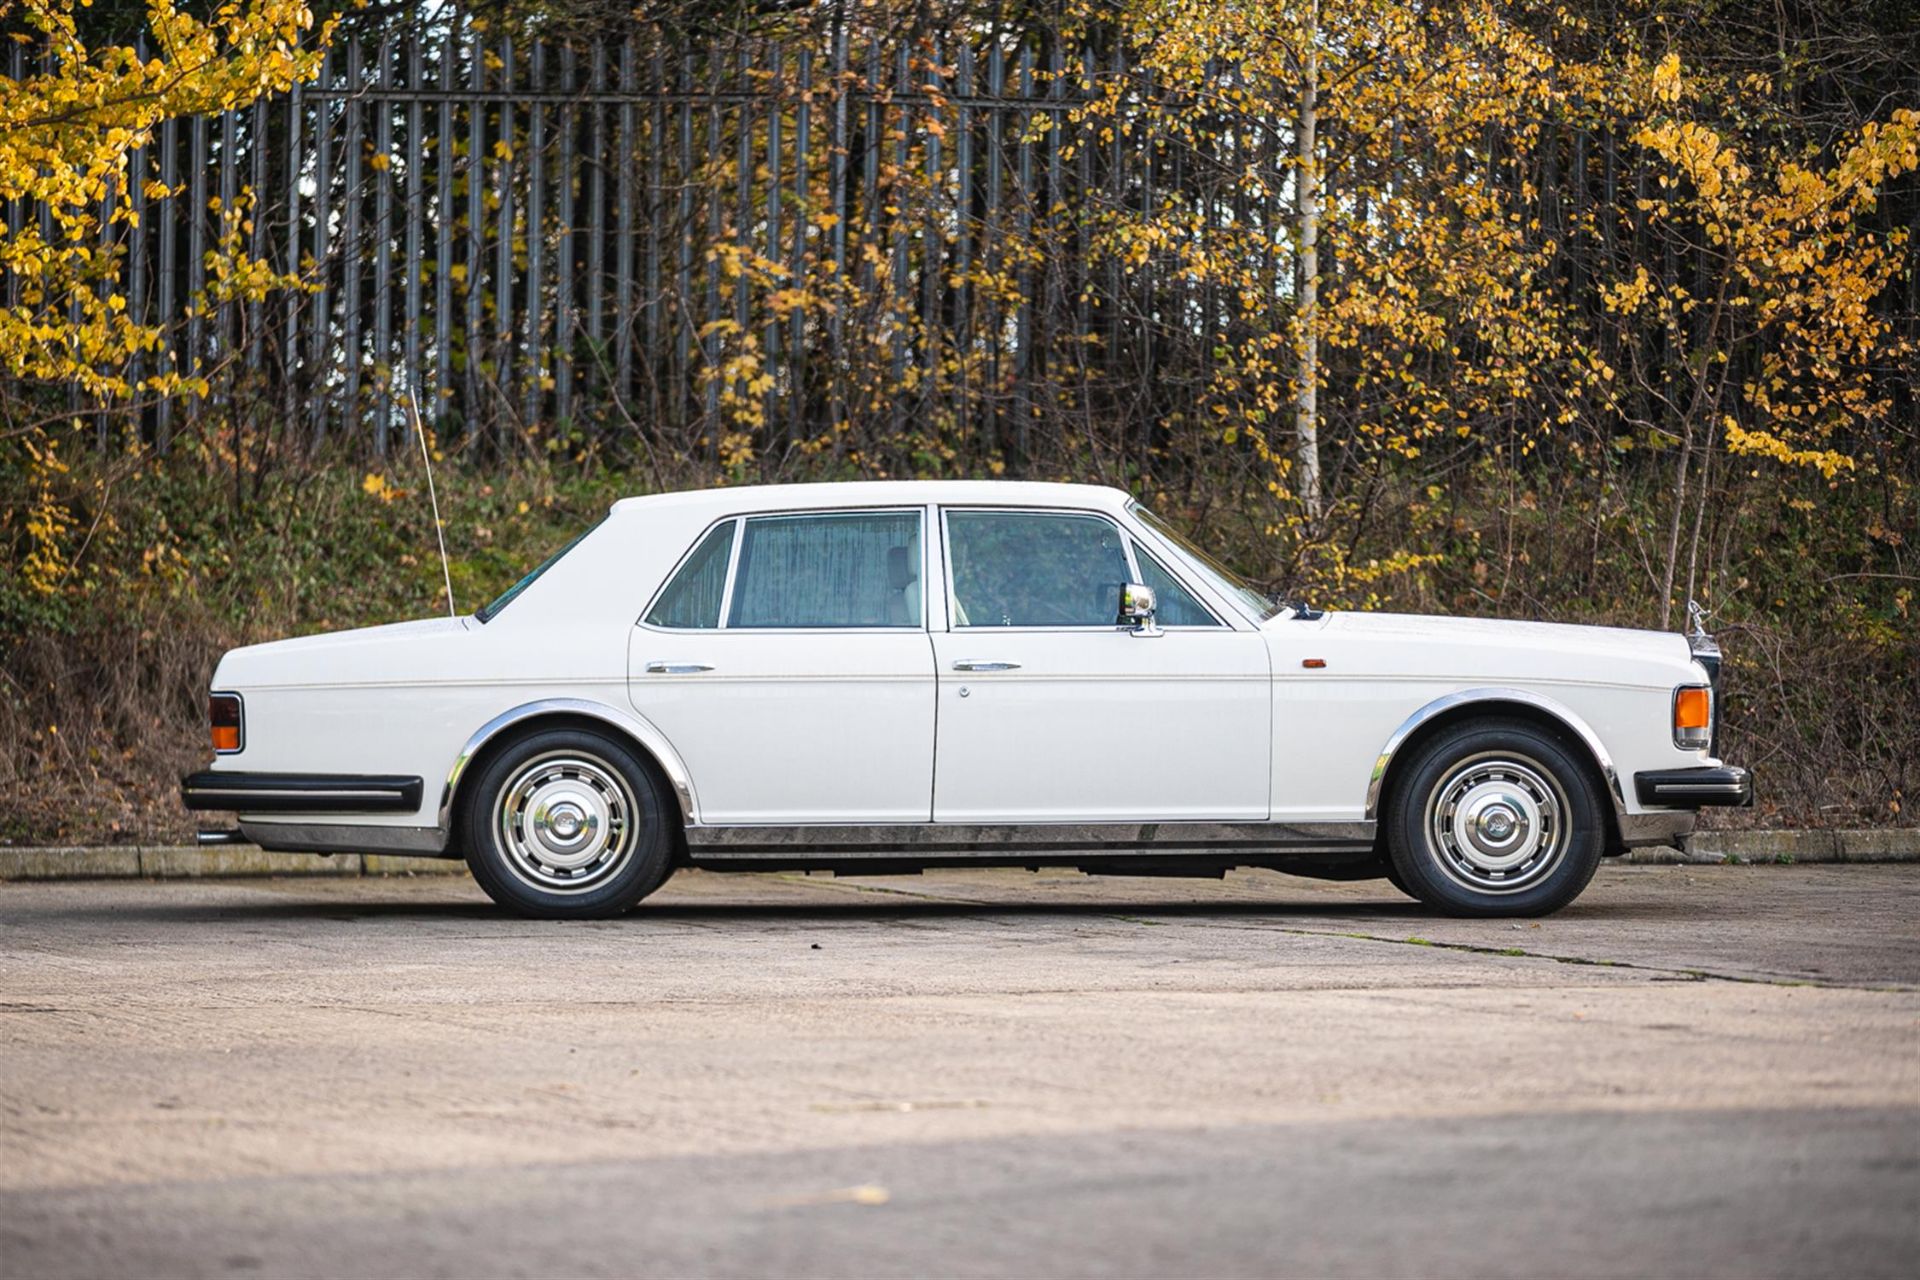 1985 Rolls-Royce Silver Spirit - One Owner - Image 5 of 10